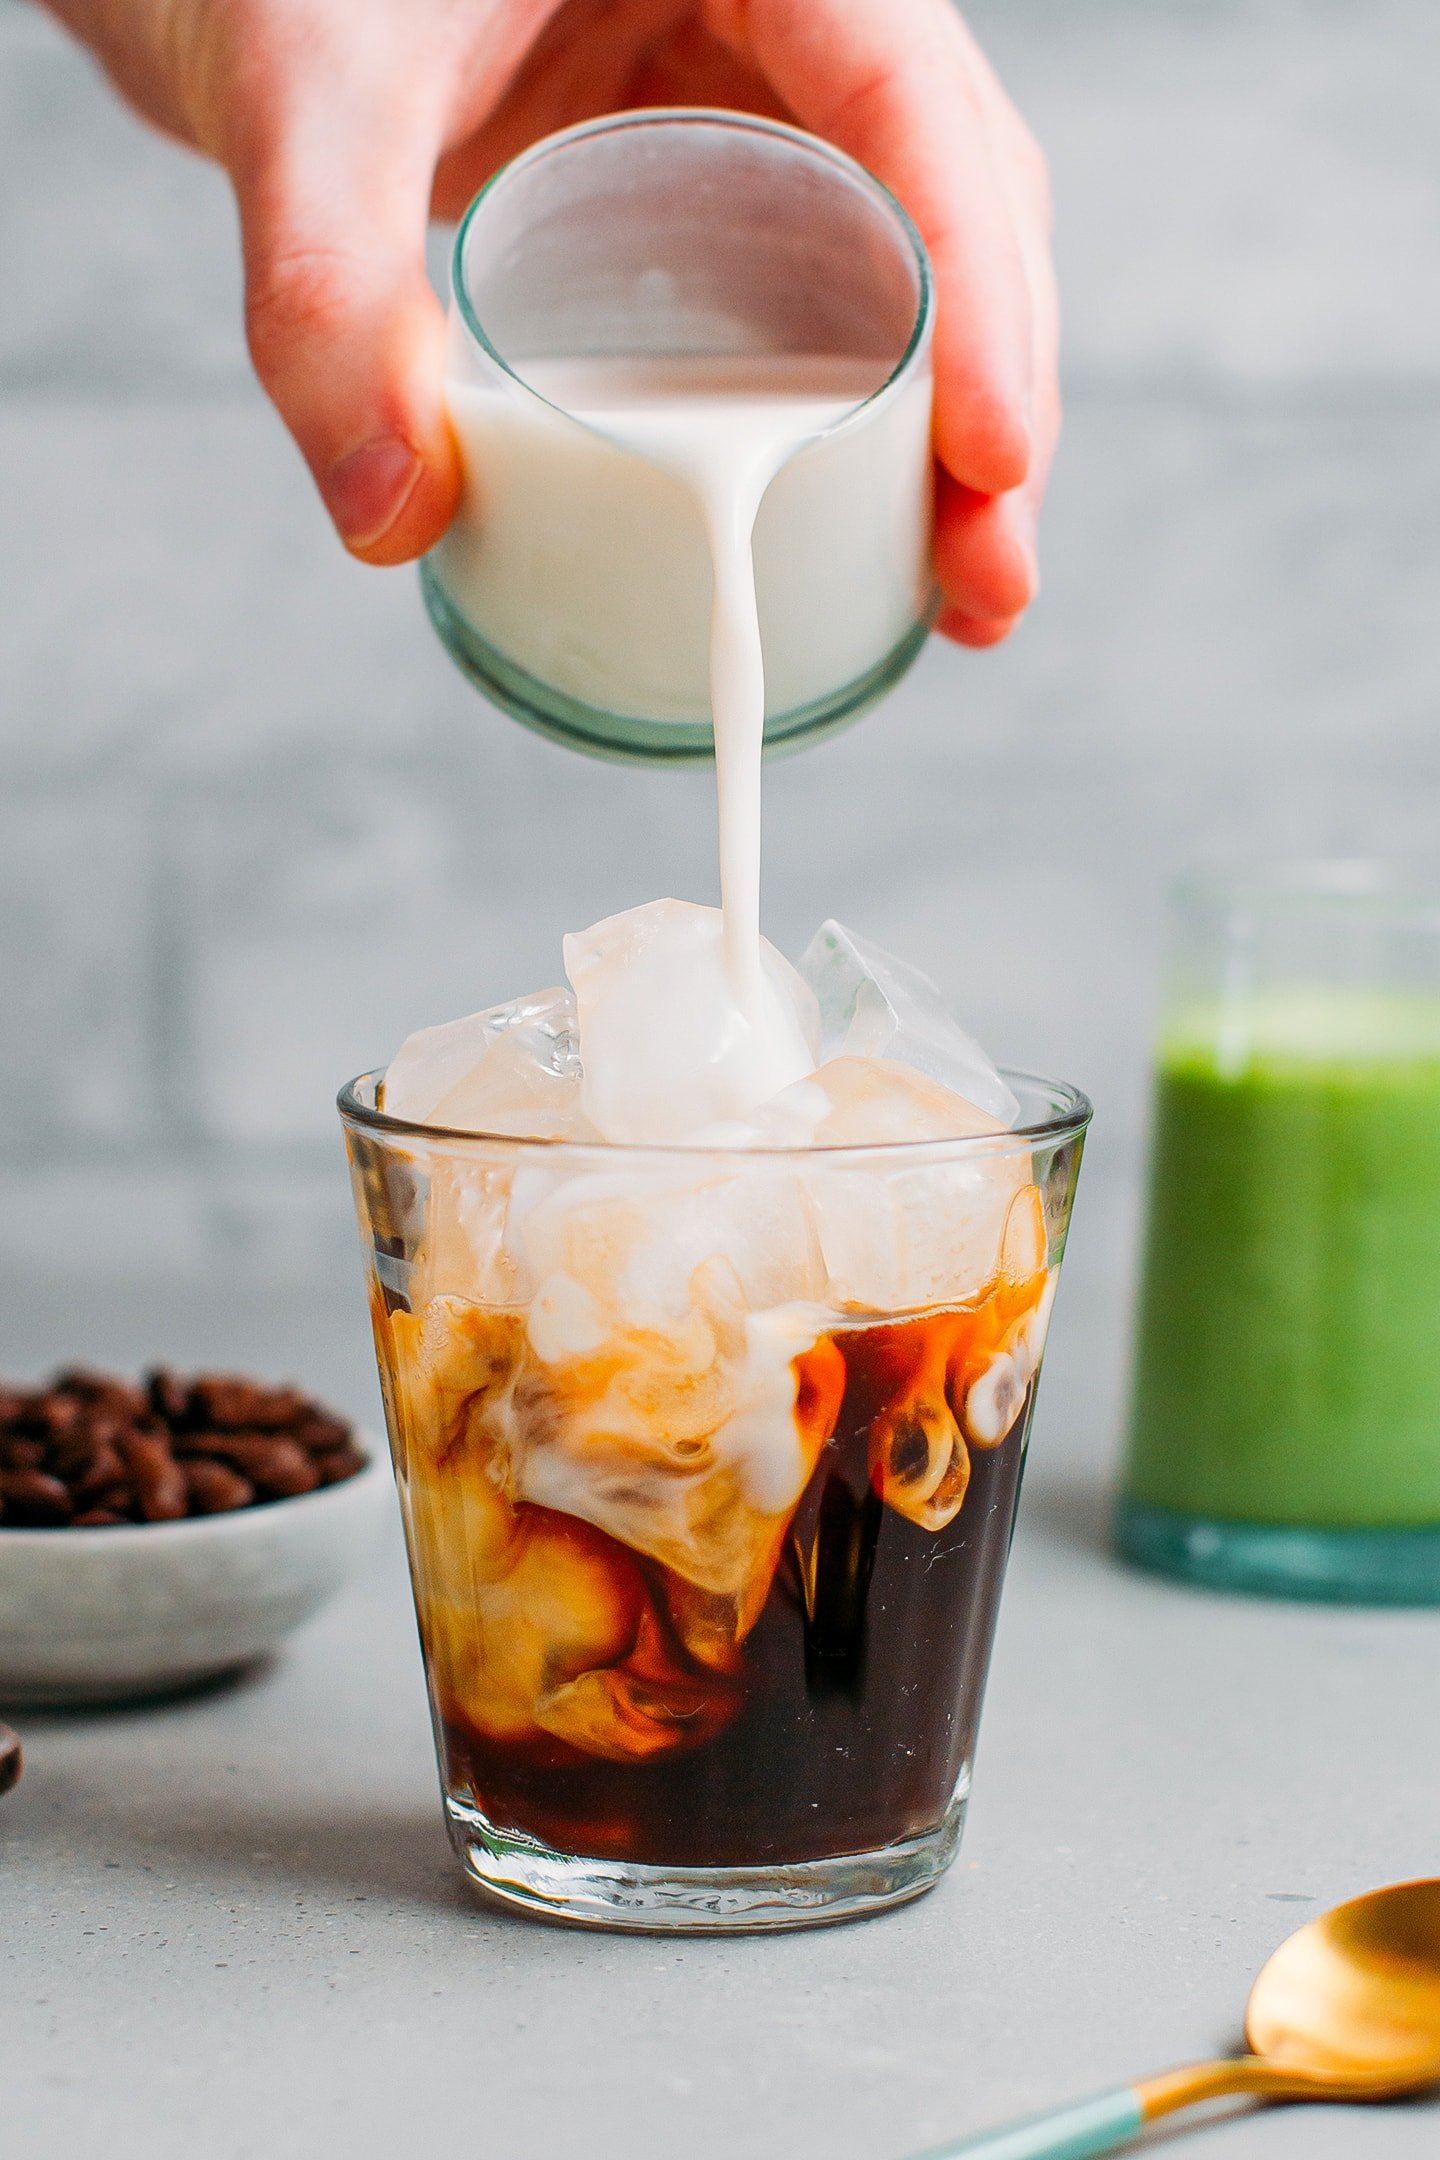 25 Recipes To Turn Your Kitchen into a Coffee Shop